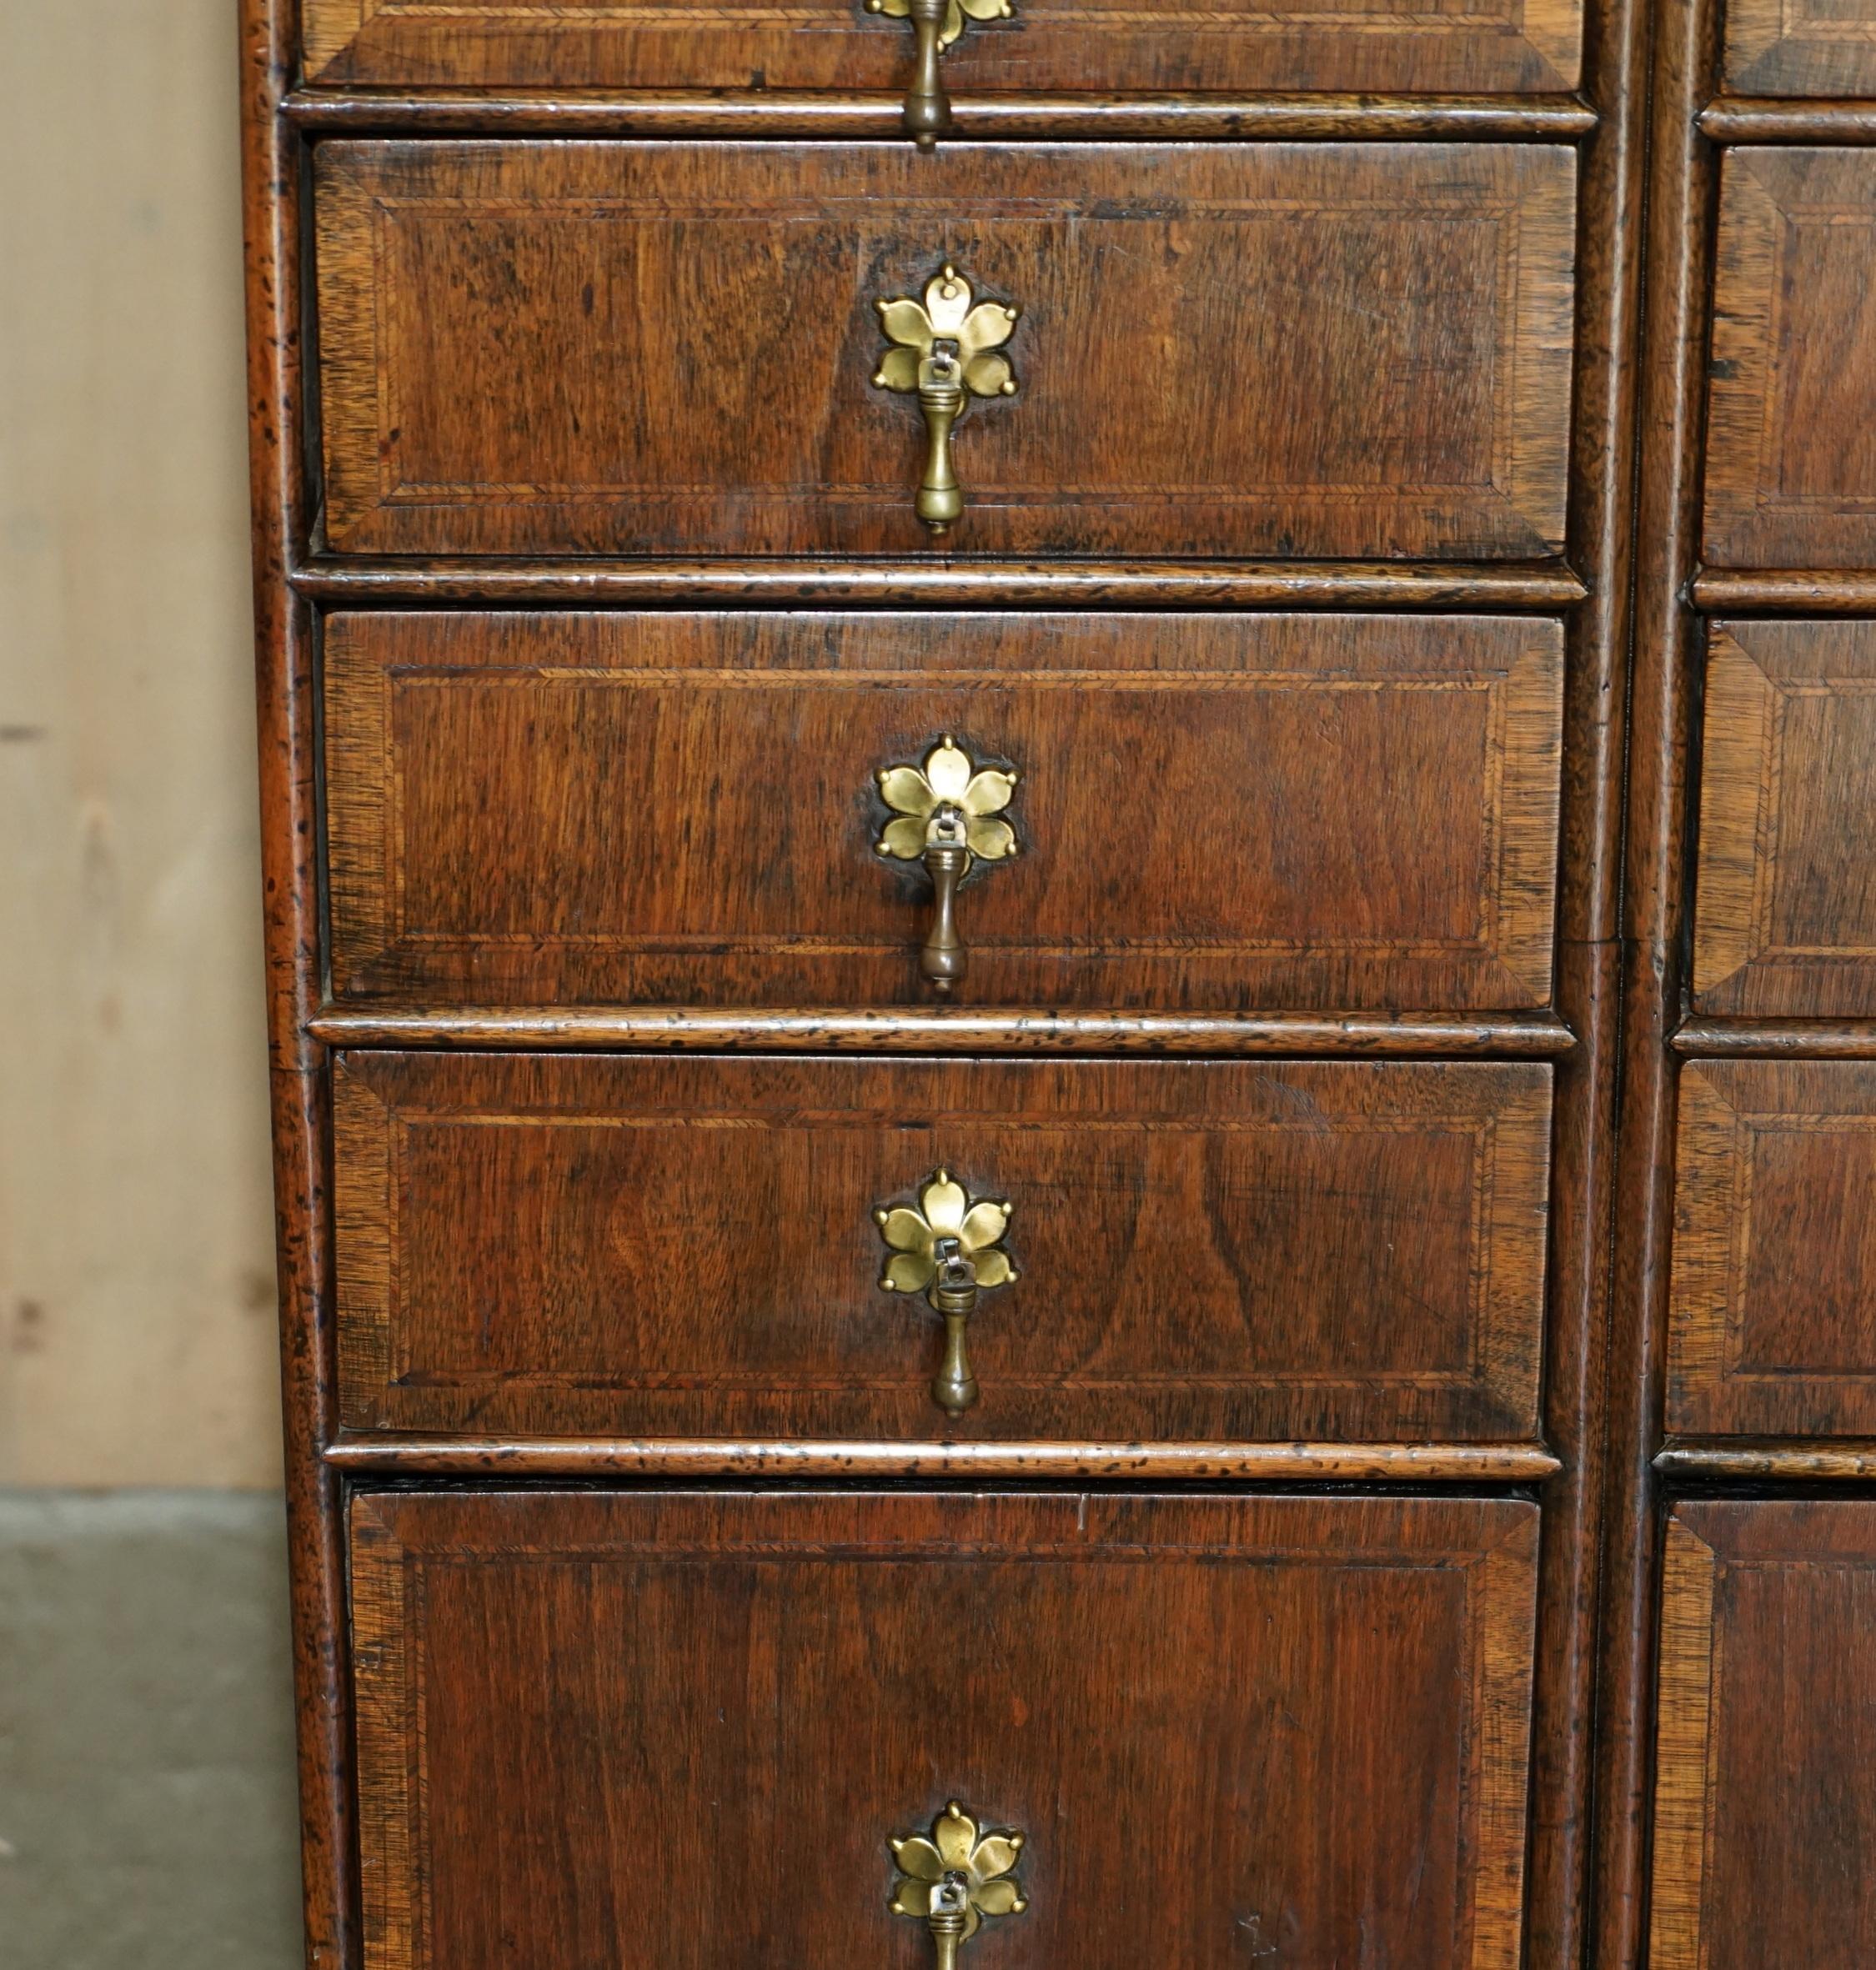 Hand-Crafted EXQUISITE ANTIQUE CIRCA 1760 BURR WALNUT GEORGE III BANK / CHEST OF DRAWERs For Sale